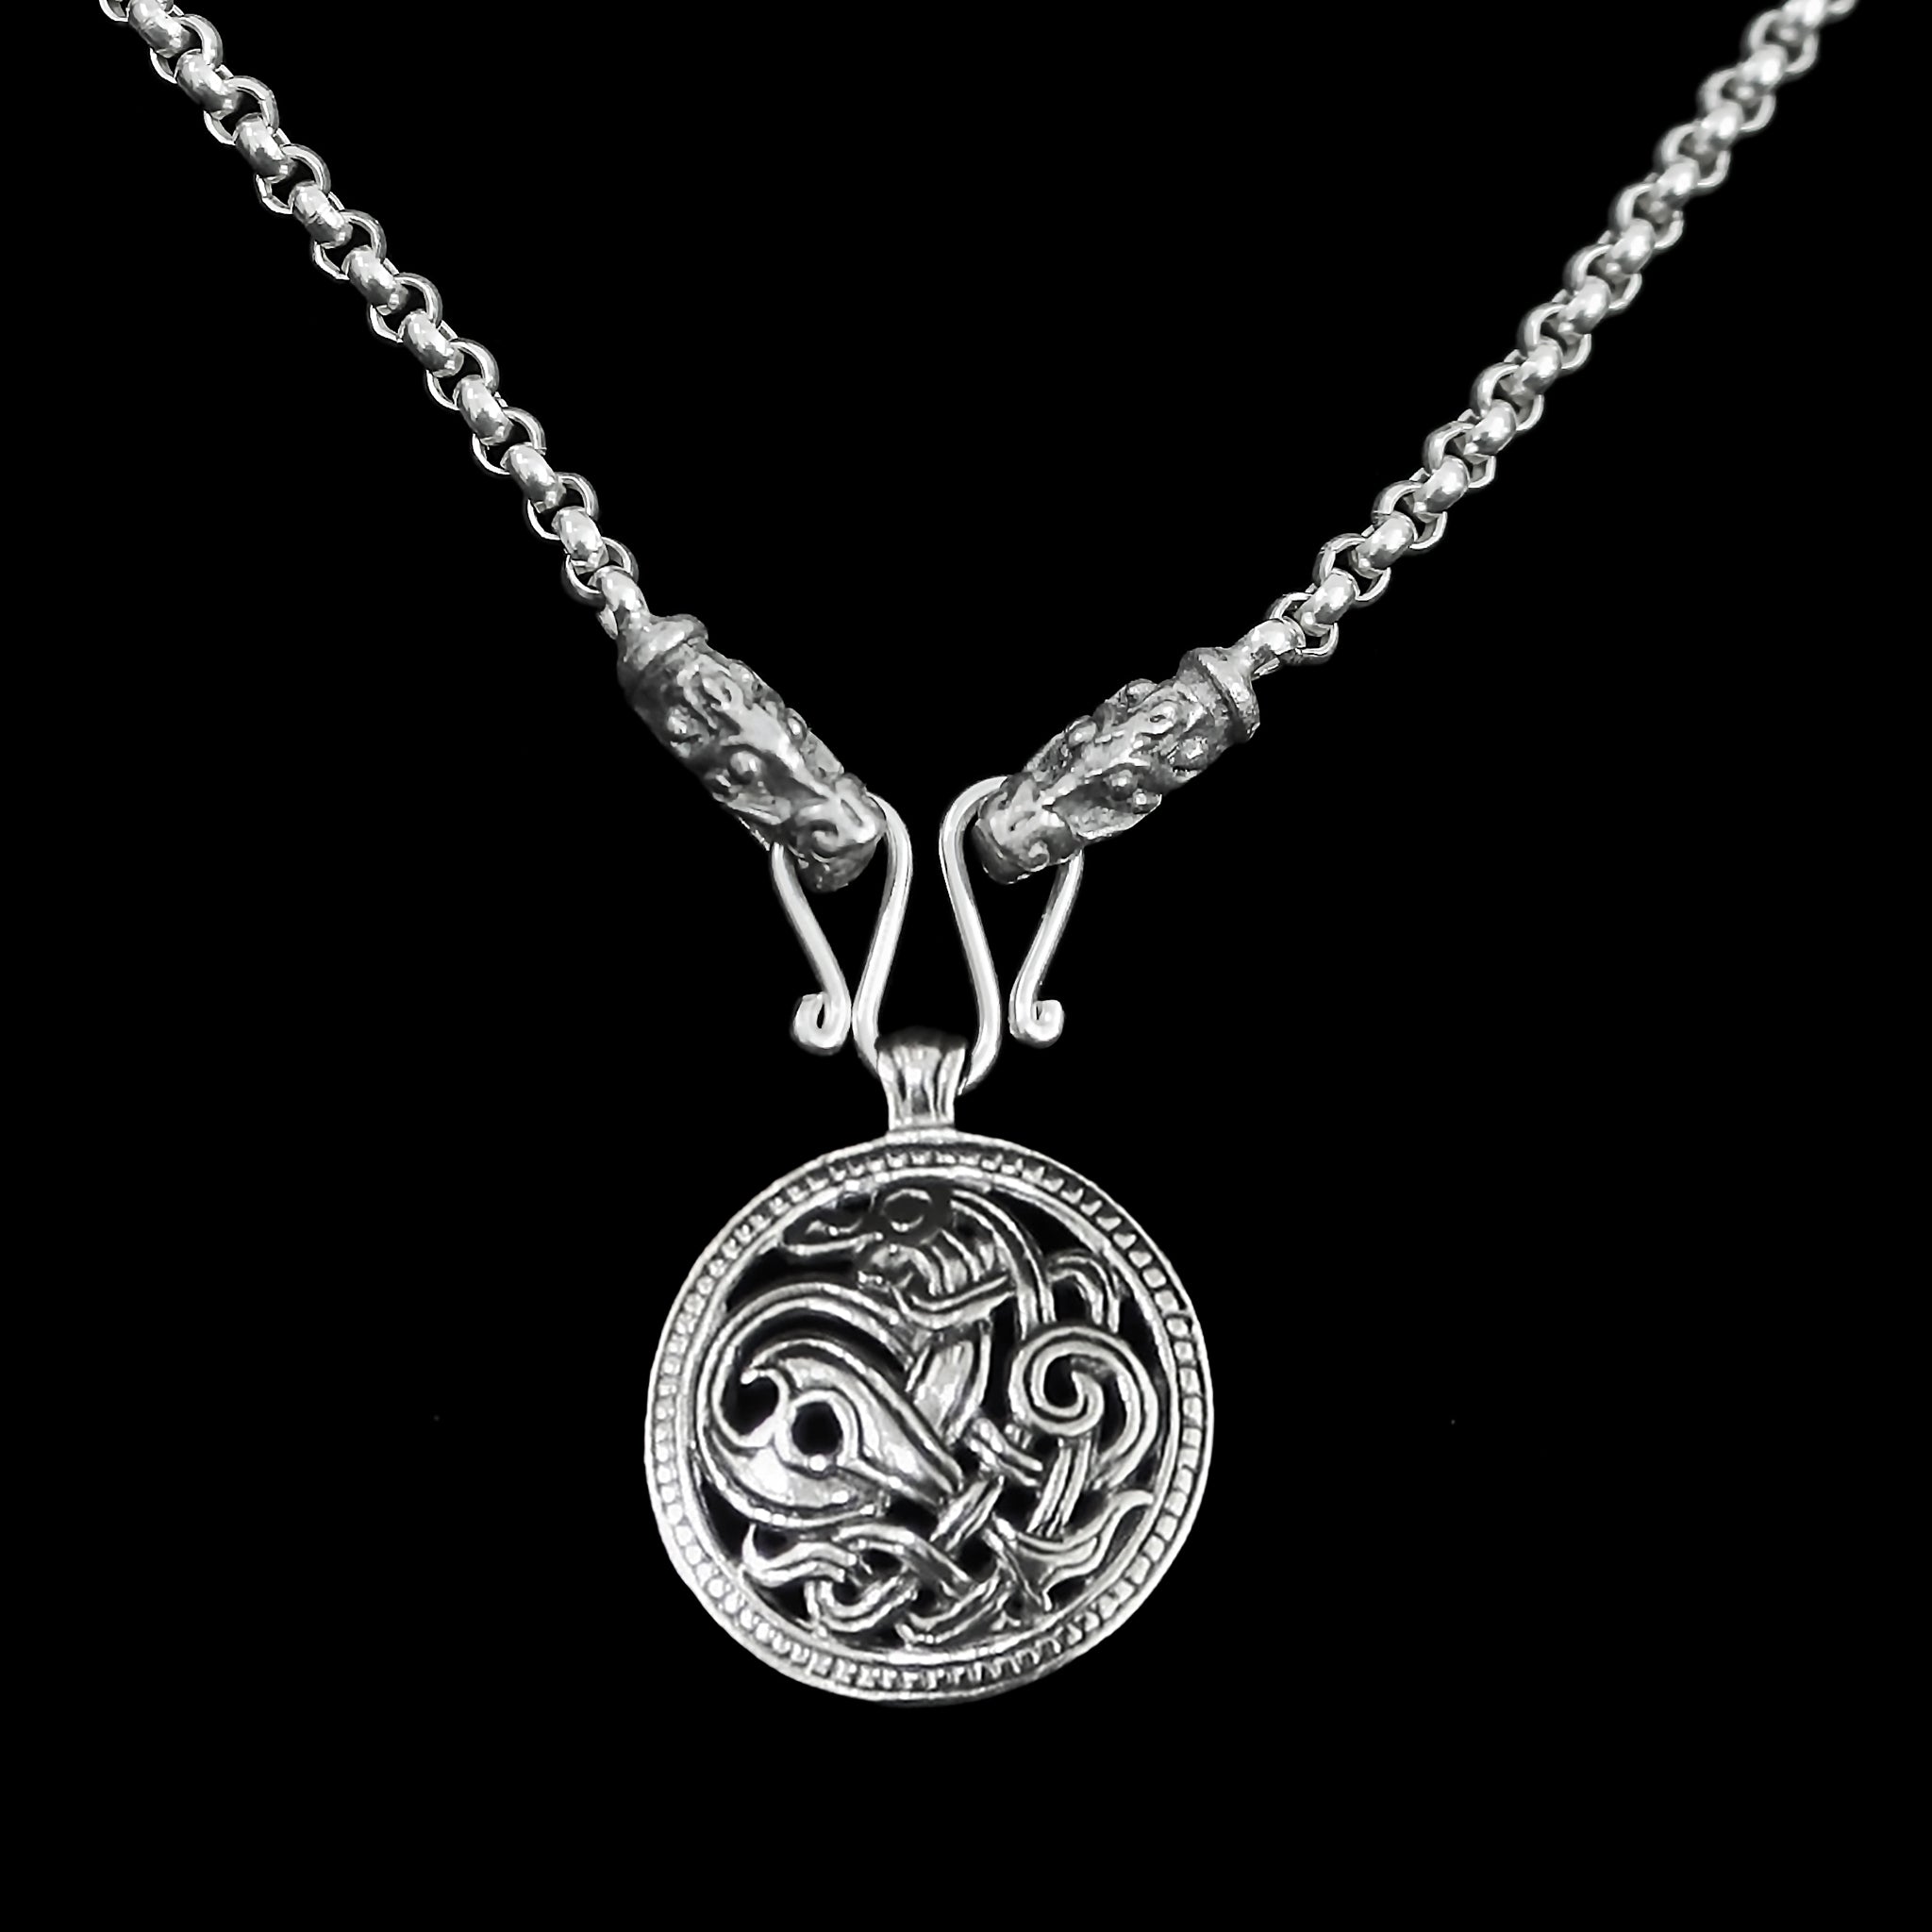 Slim Silver Anchor Chain Pendant Necklace with Gotland Dragon Heads with Jelling Dragon Pendant